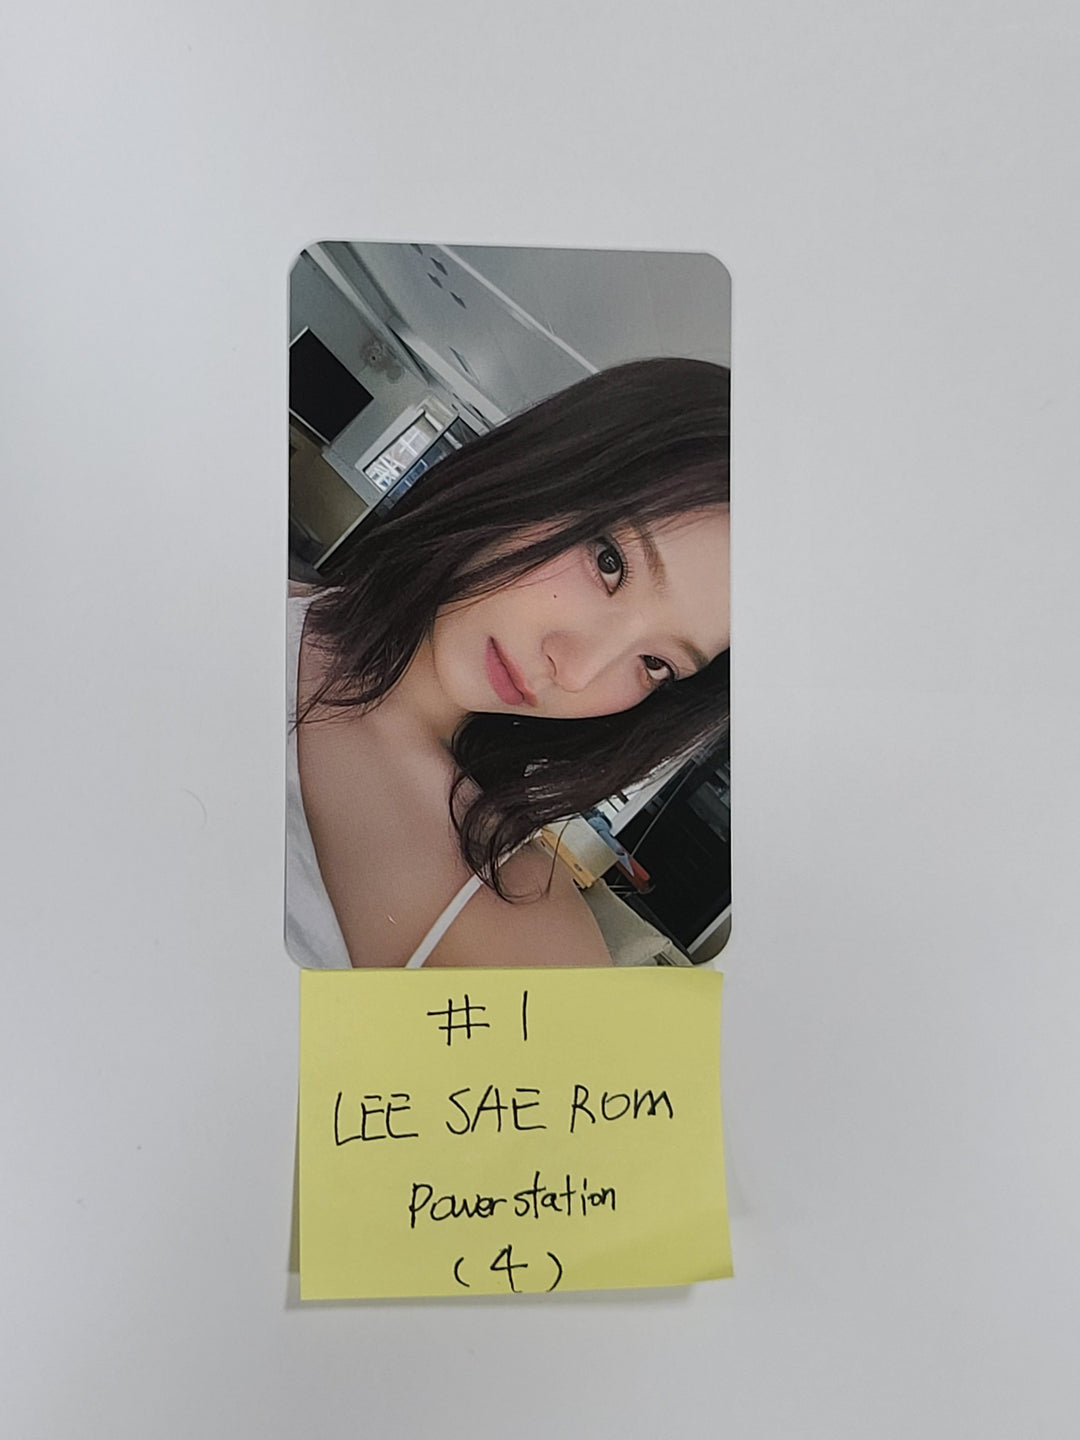 Fromis_9 "from our Memento Box" - Powerstation Luckydraw Slim PVC Photocard